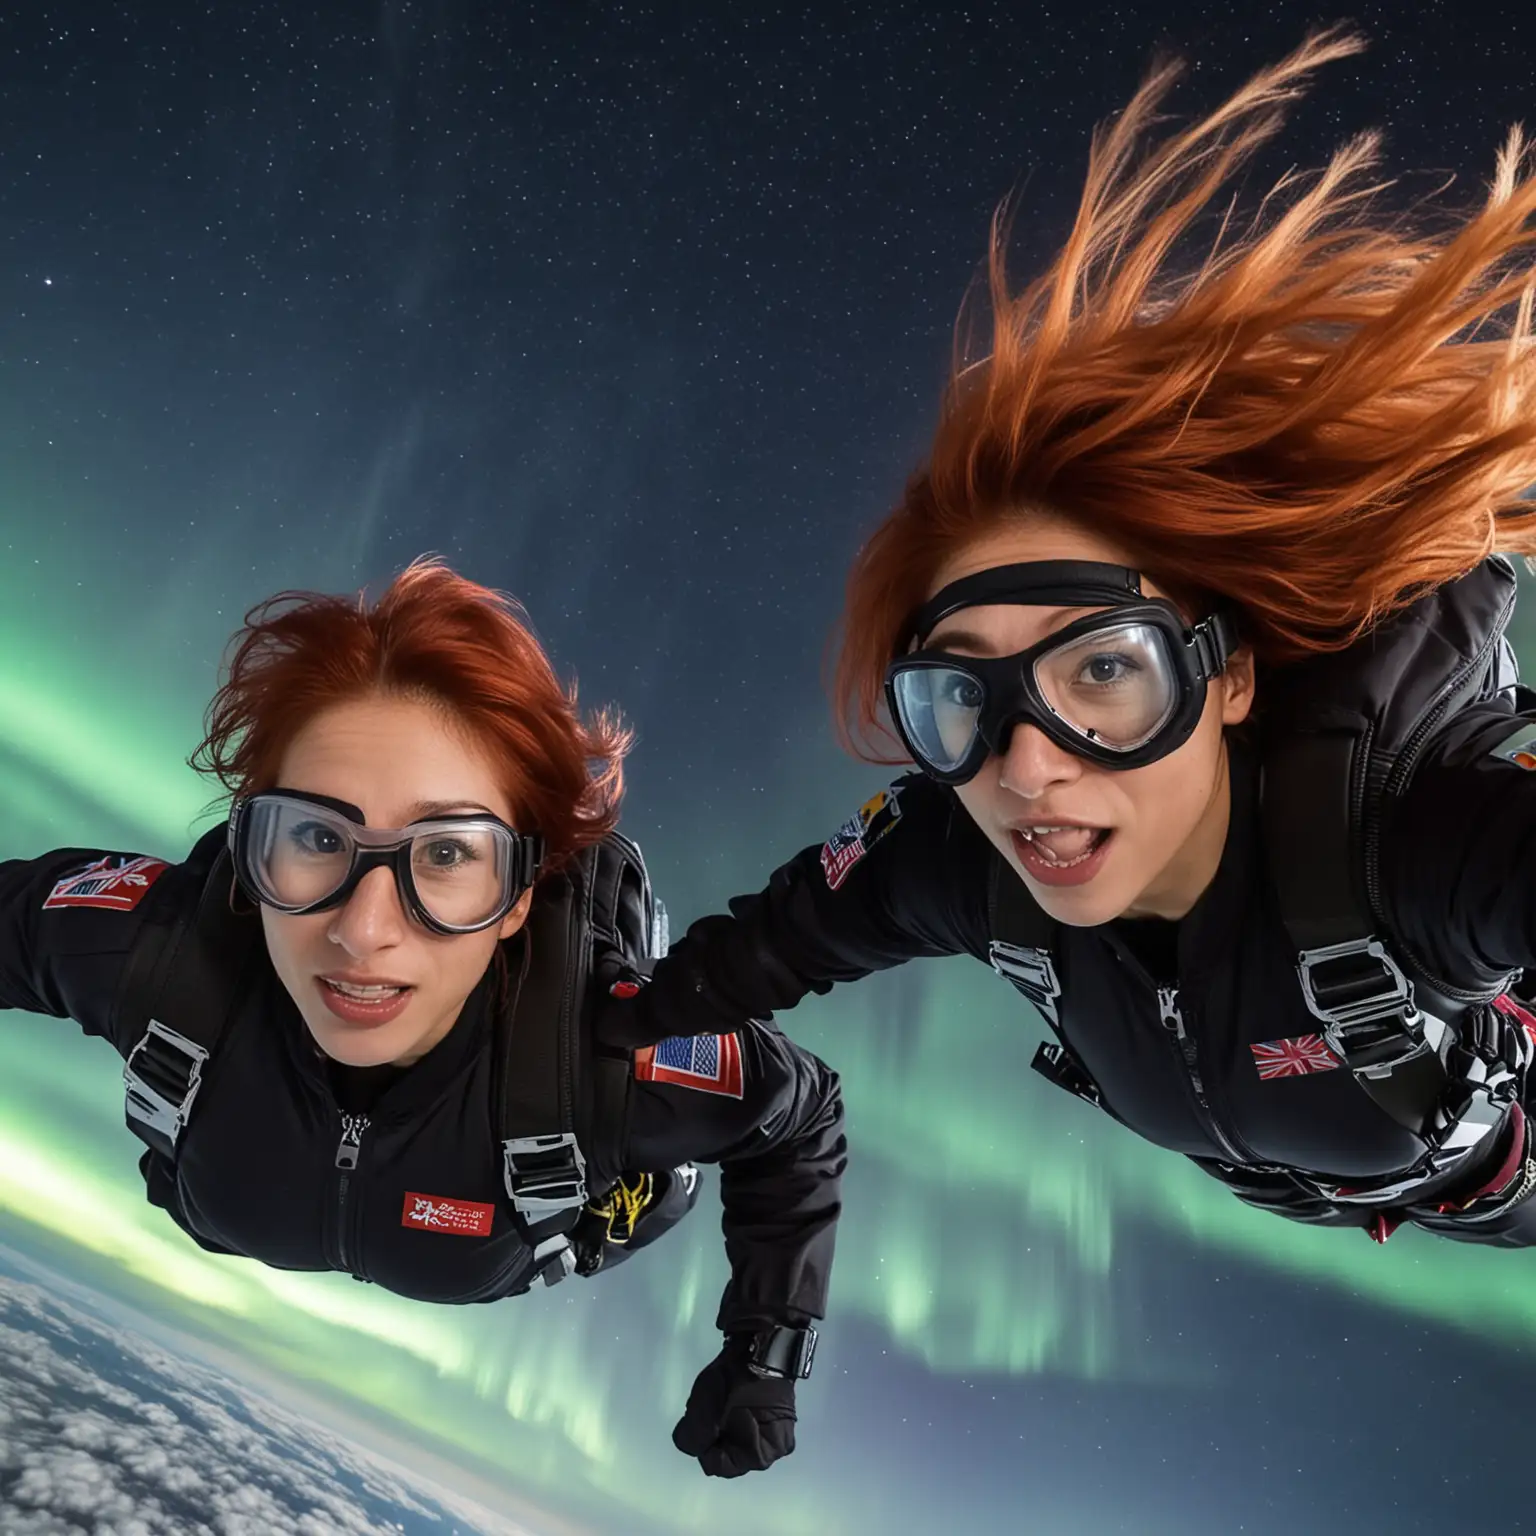 Diverse Skydivers Under Northern Lights Redhaired Japanese and Darkhaired English Woman in Goggles